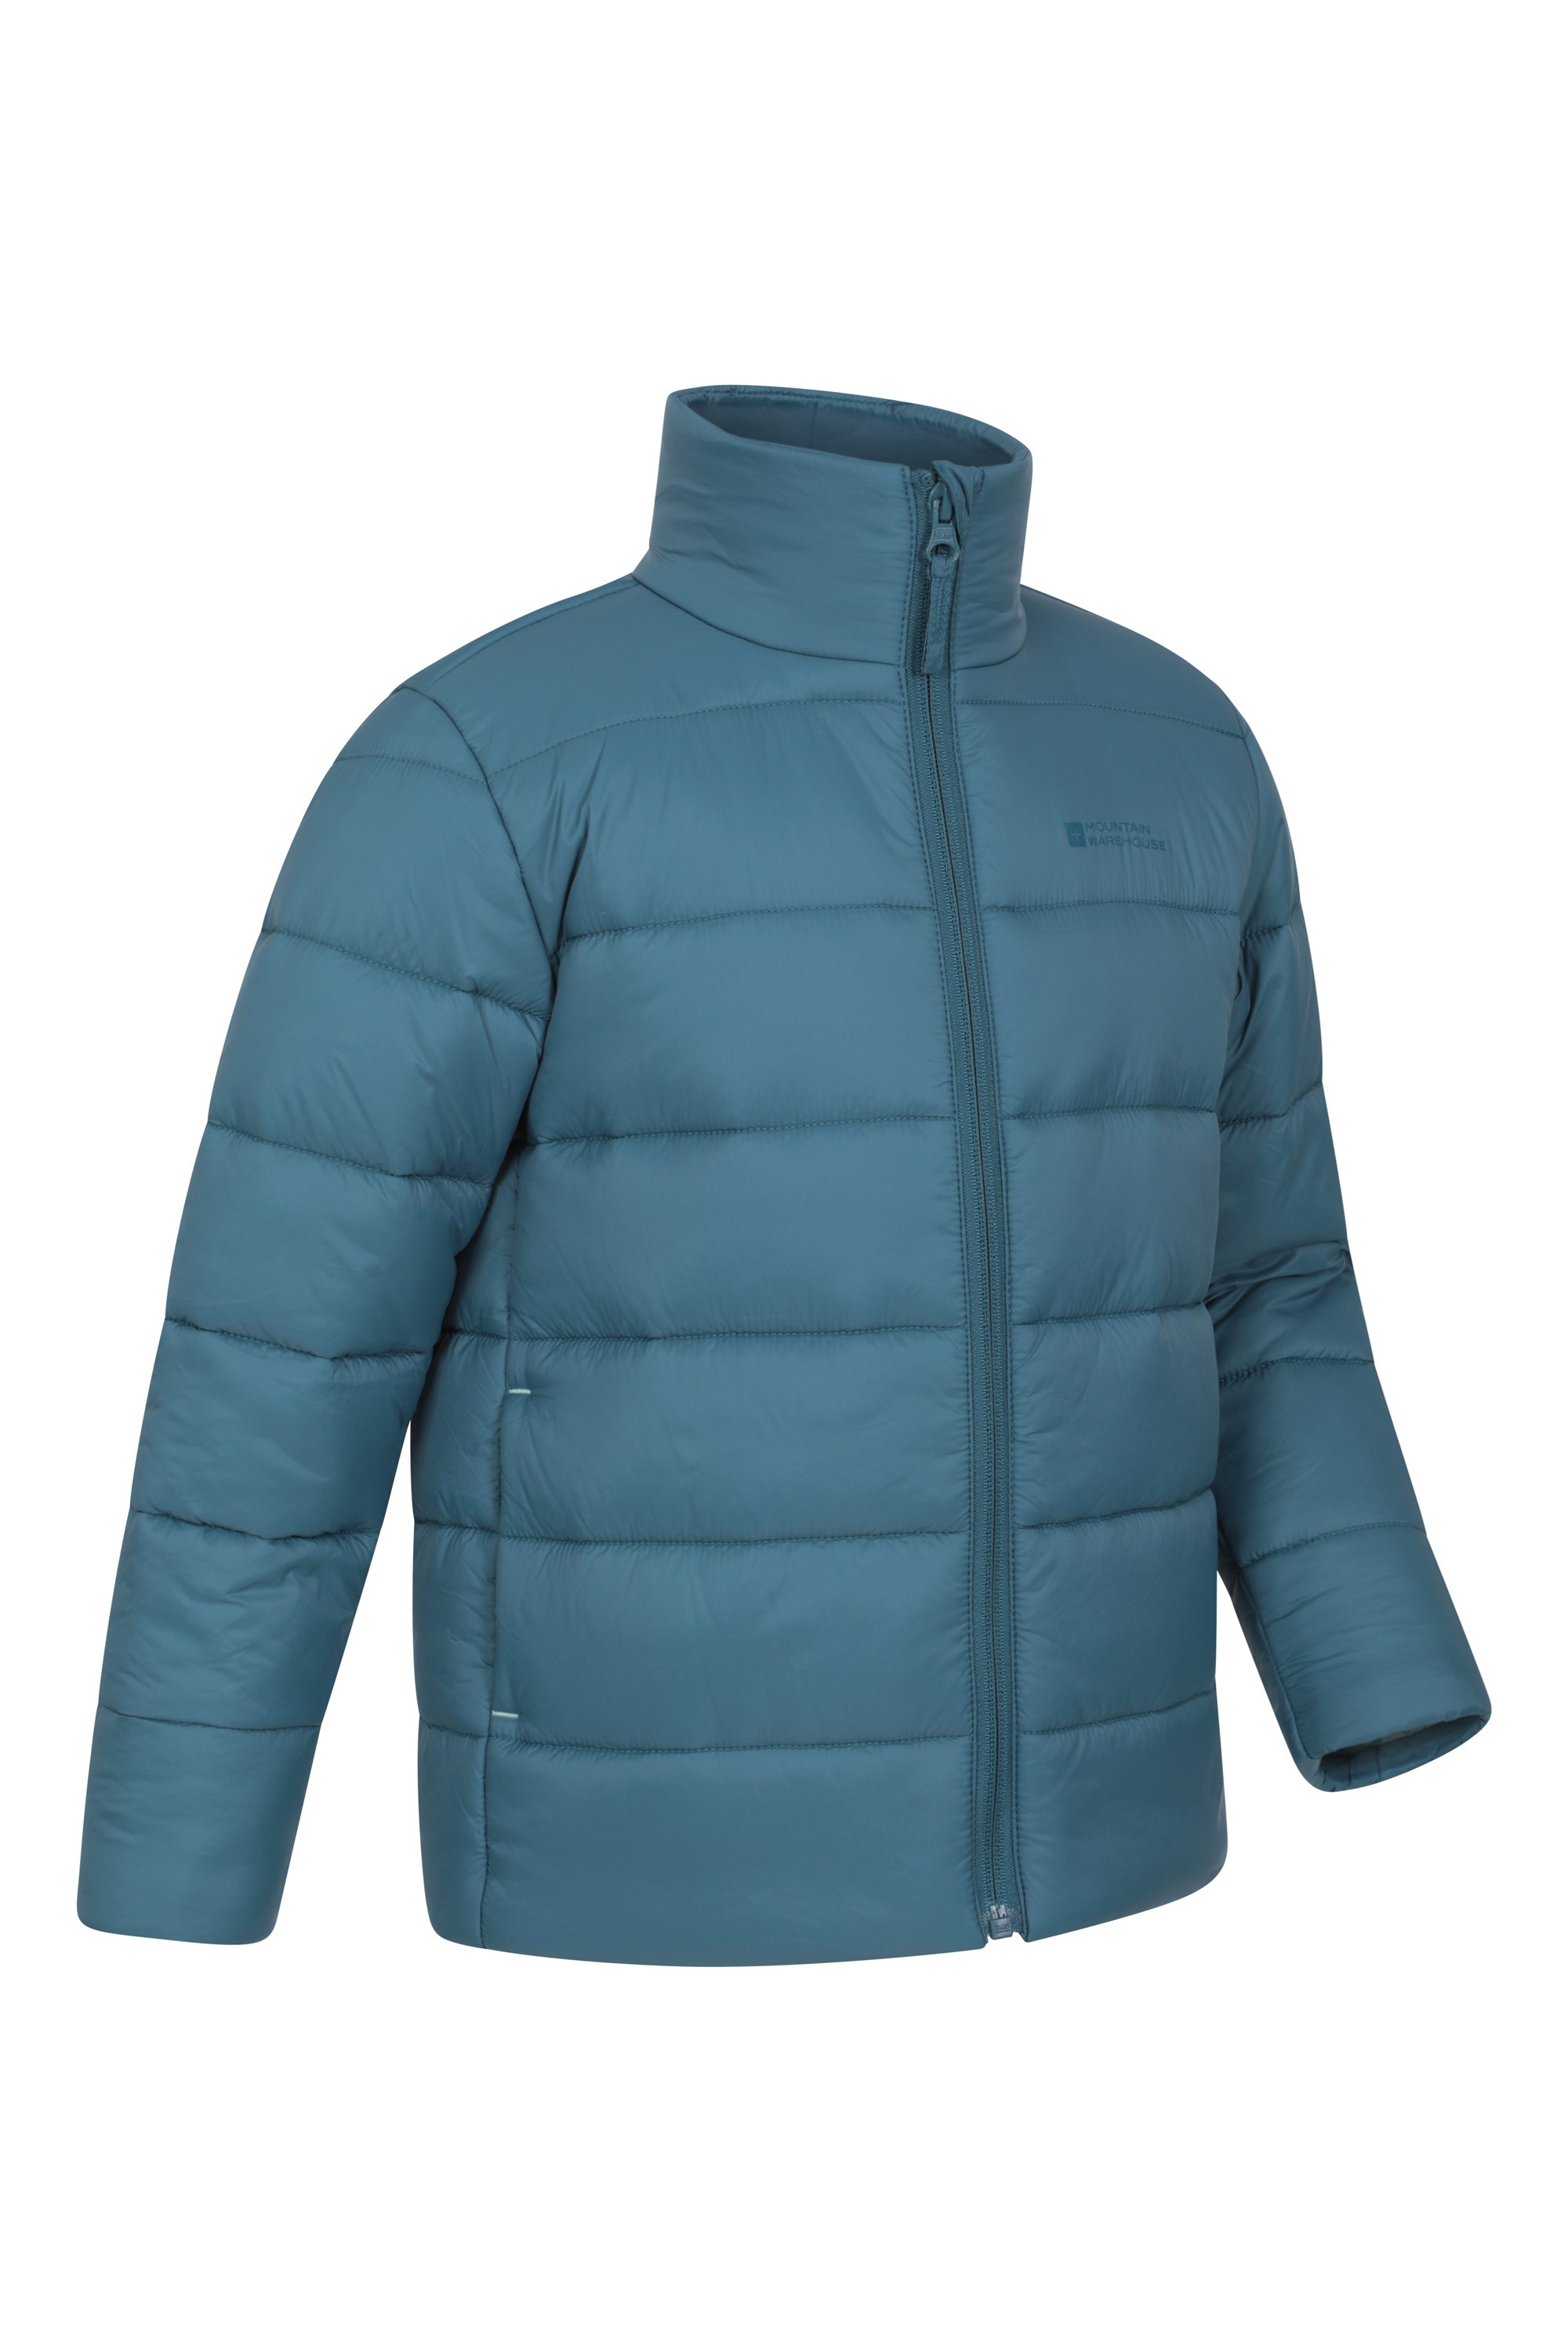 Padded Insulation Side Pockets Mountain Warehouse Grove Kids Unisex Water Resistant Jacket Microfibre Filling Best for Winter & Outdoors Girls & Boys Raincoat